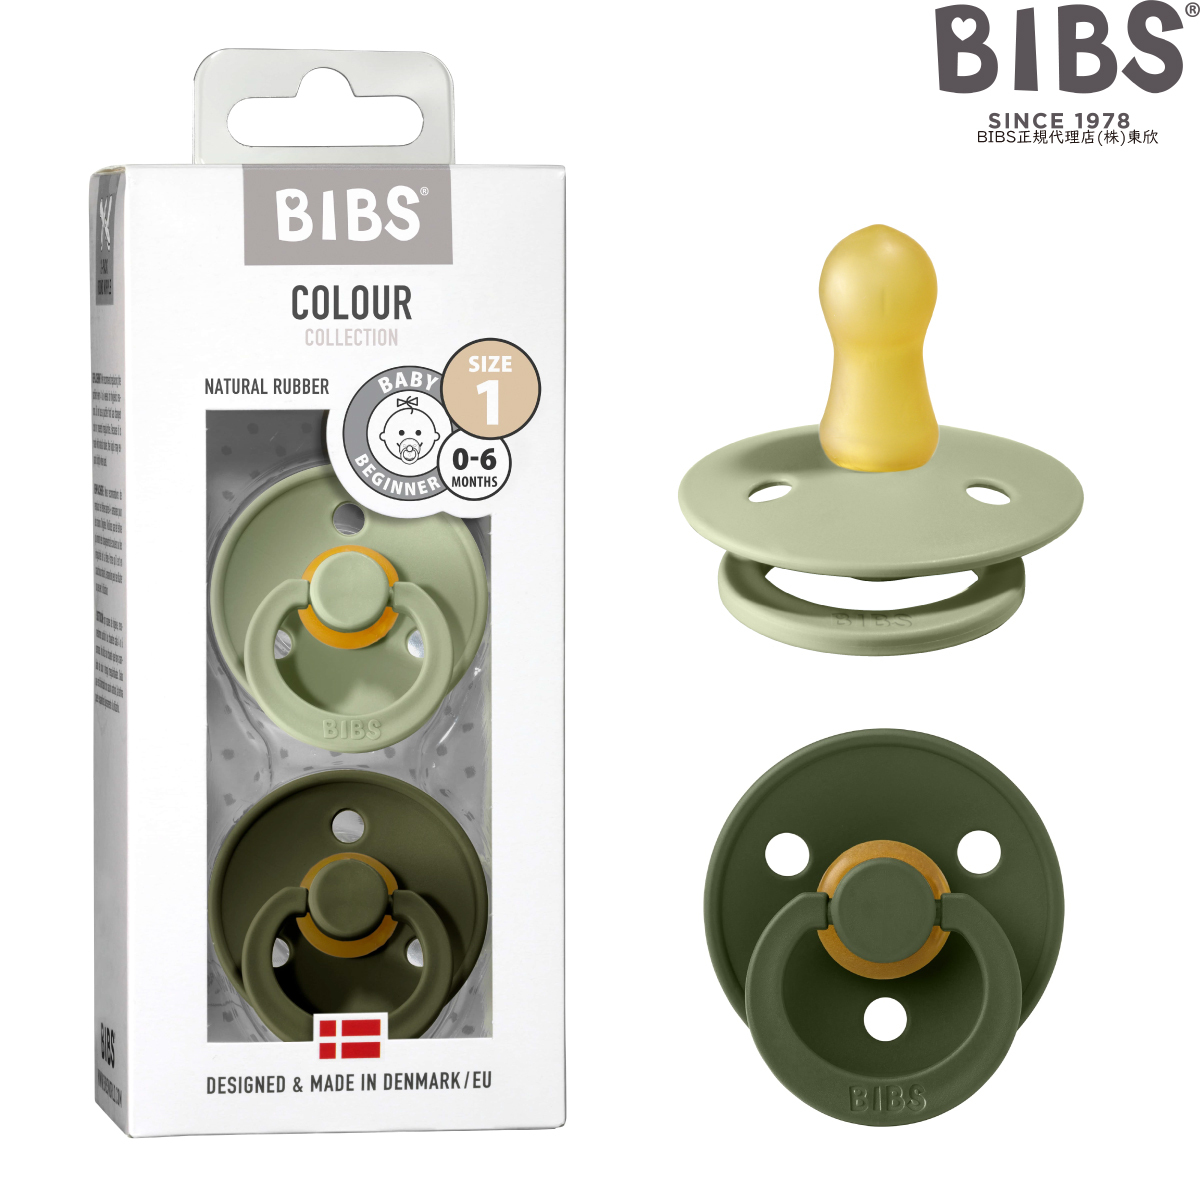 BIBS ( bib s) natural rubber pacifier 2 piece set |COLOUR Designed&Made in Denmark celebration gift celebration of a birth recommendation 